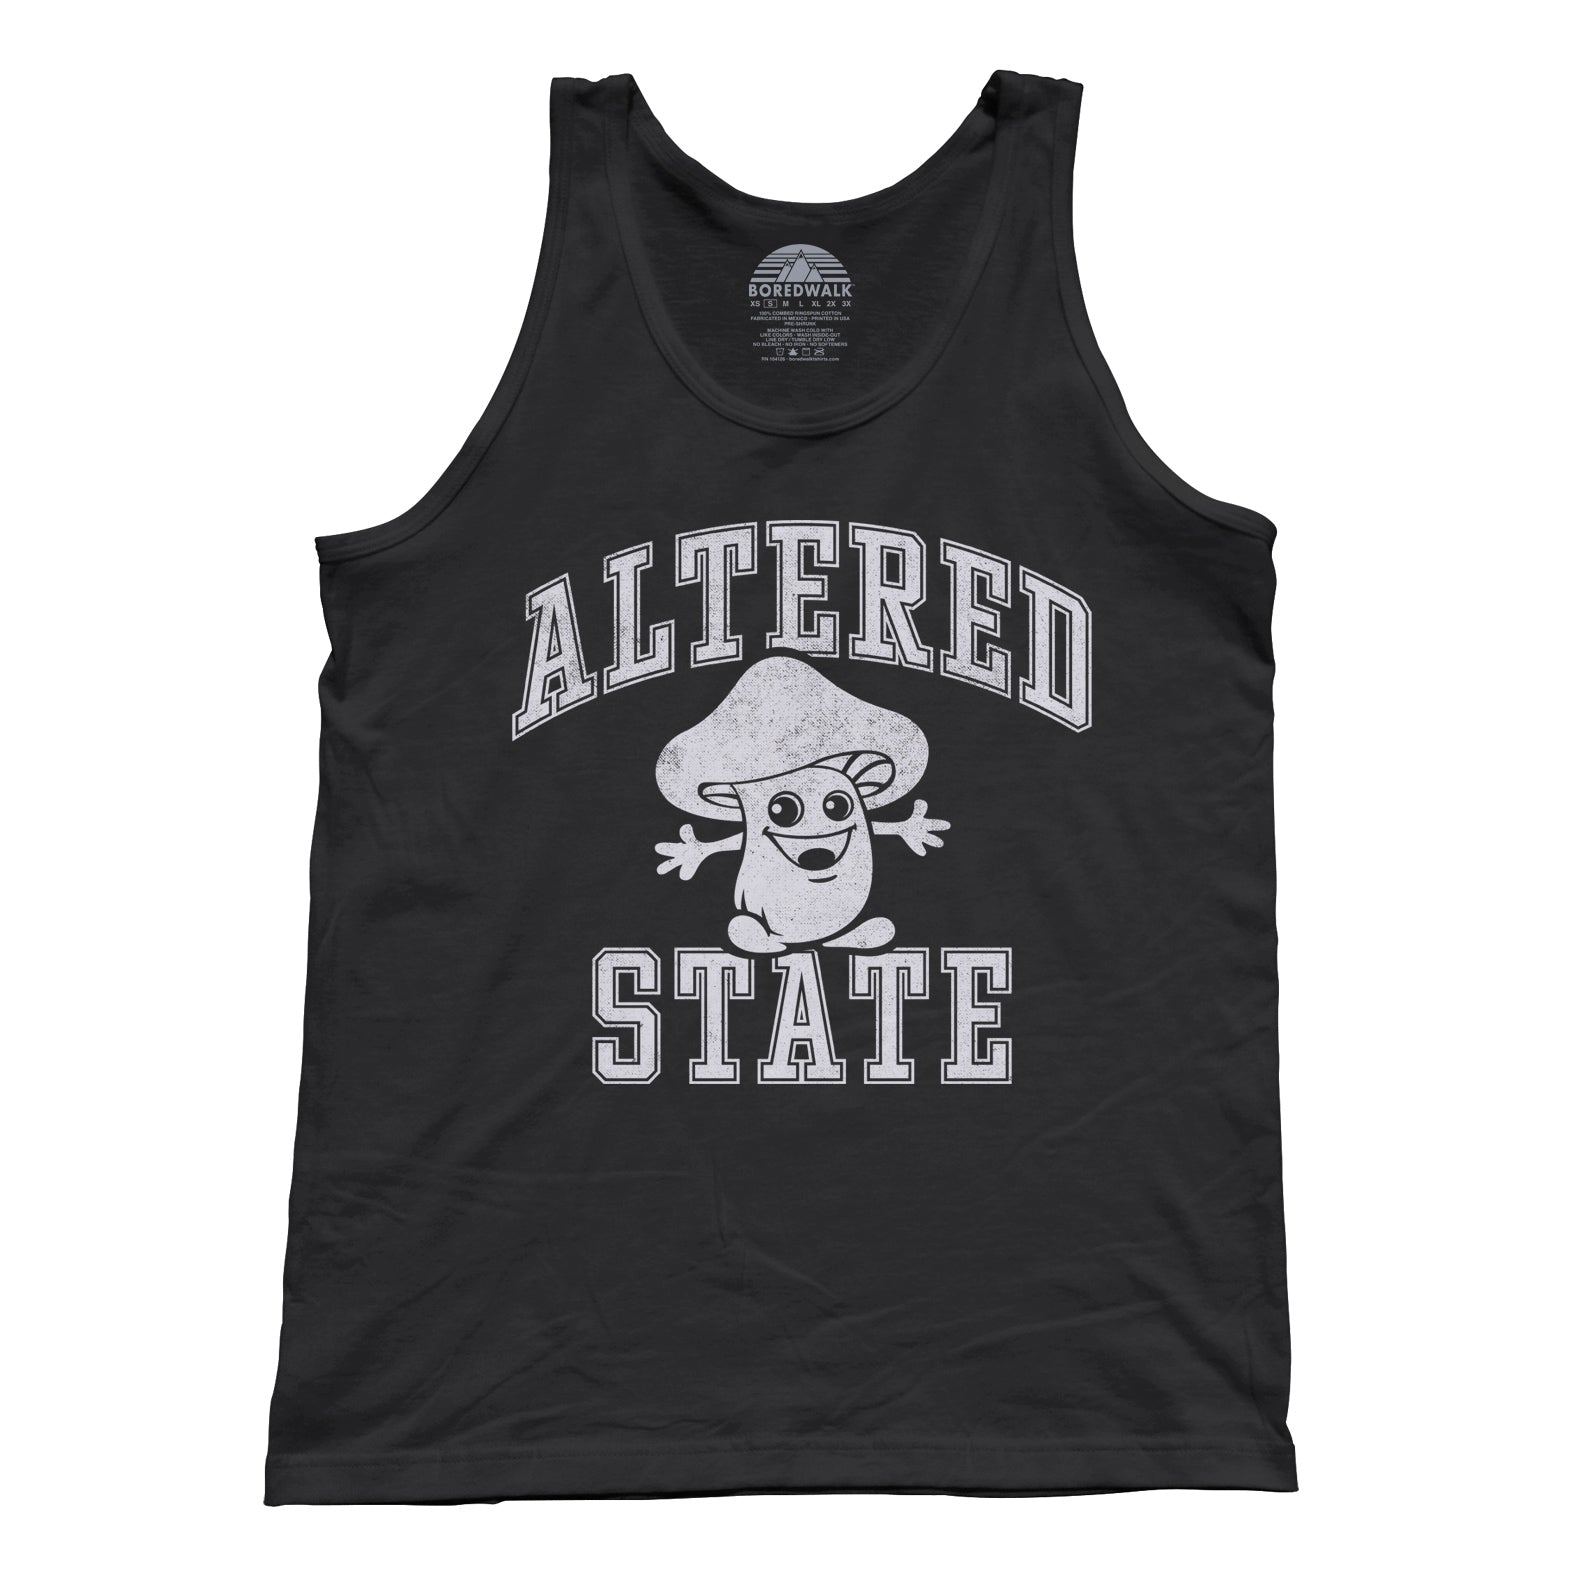 Unisex Altered State Tank Top